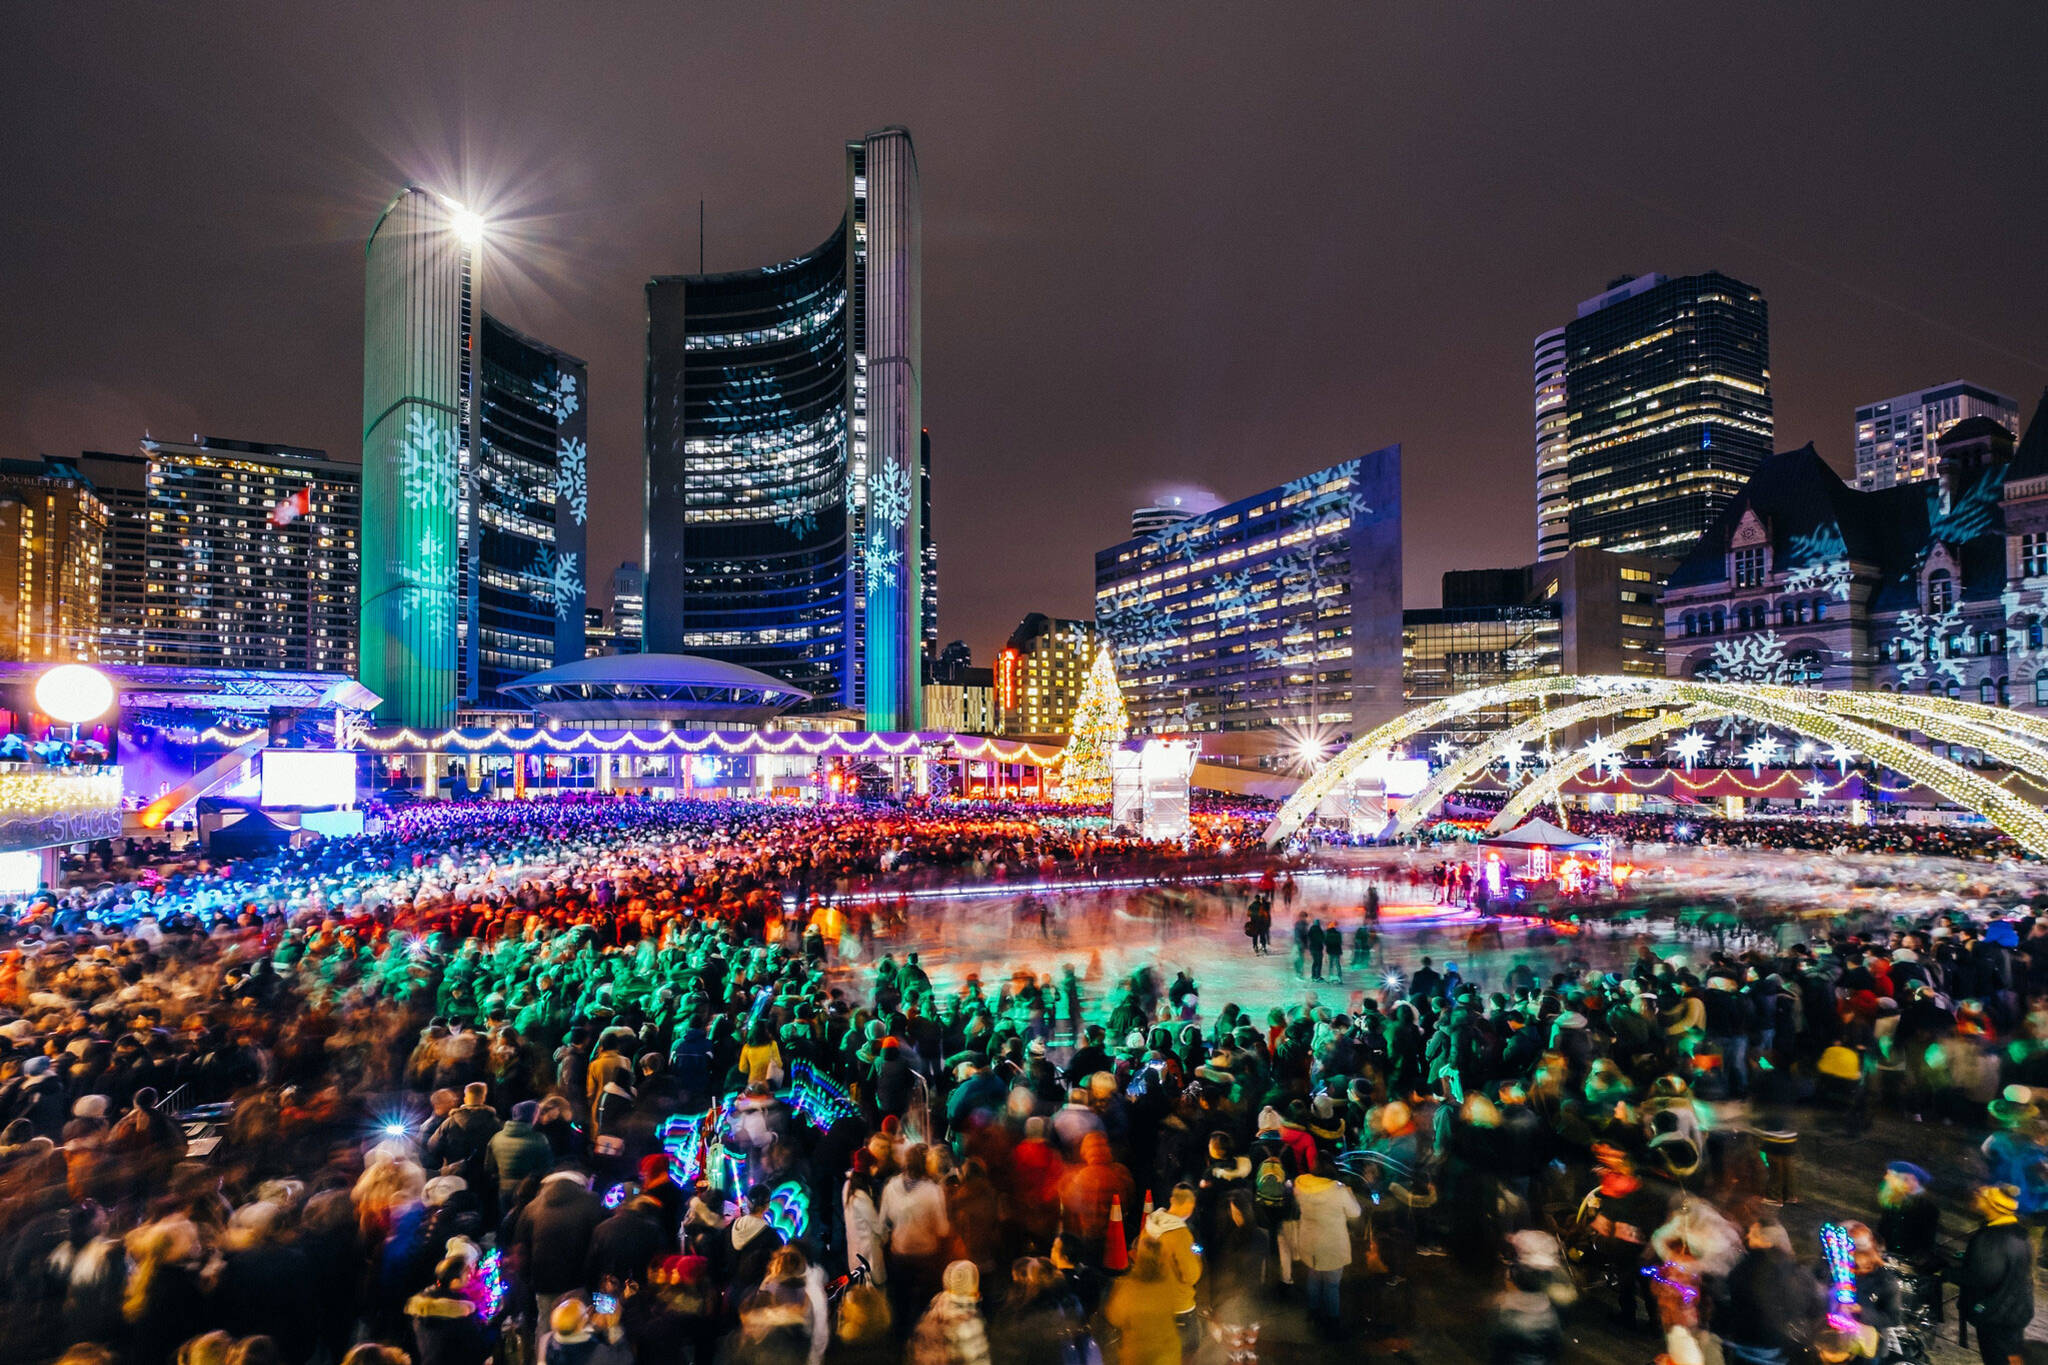 Toronto is getting a massive lights festival with glowing lanterns this